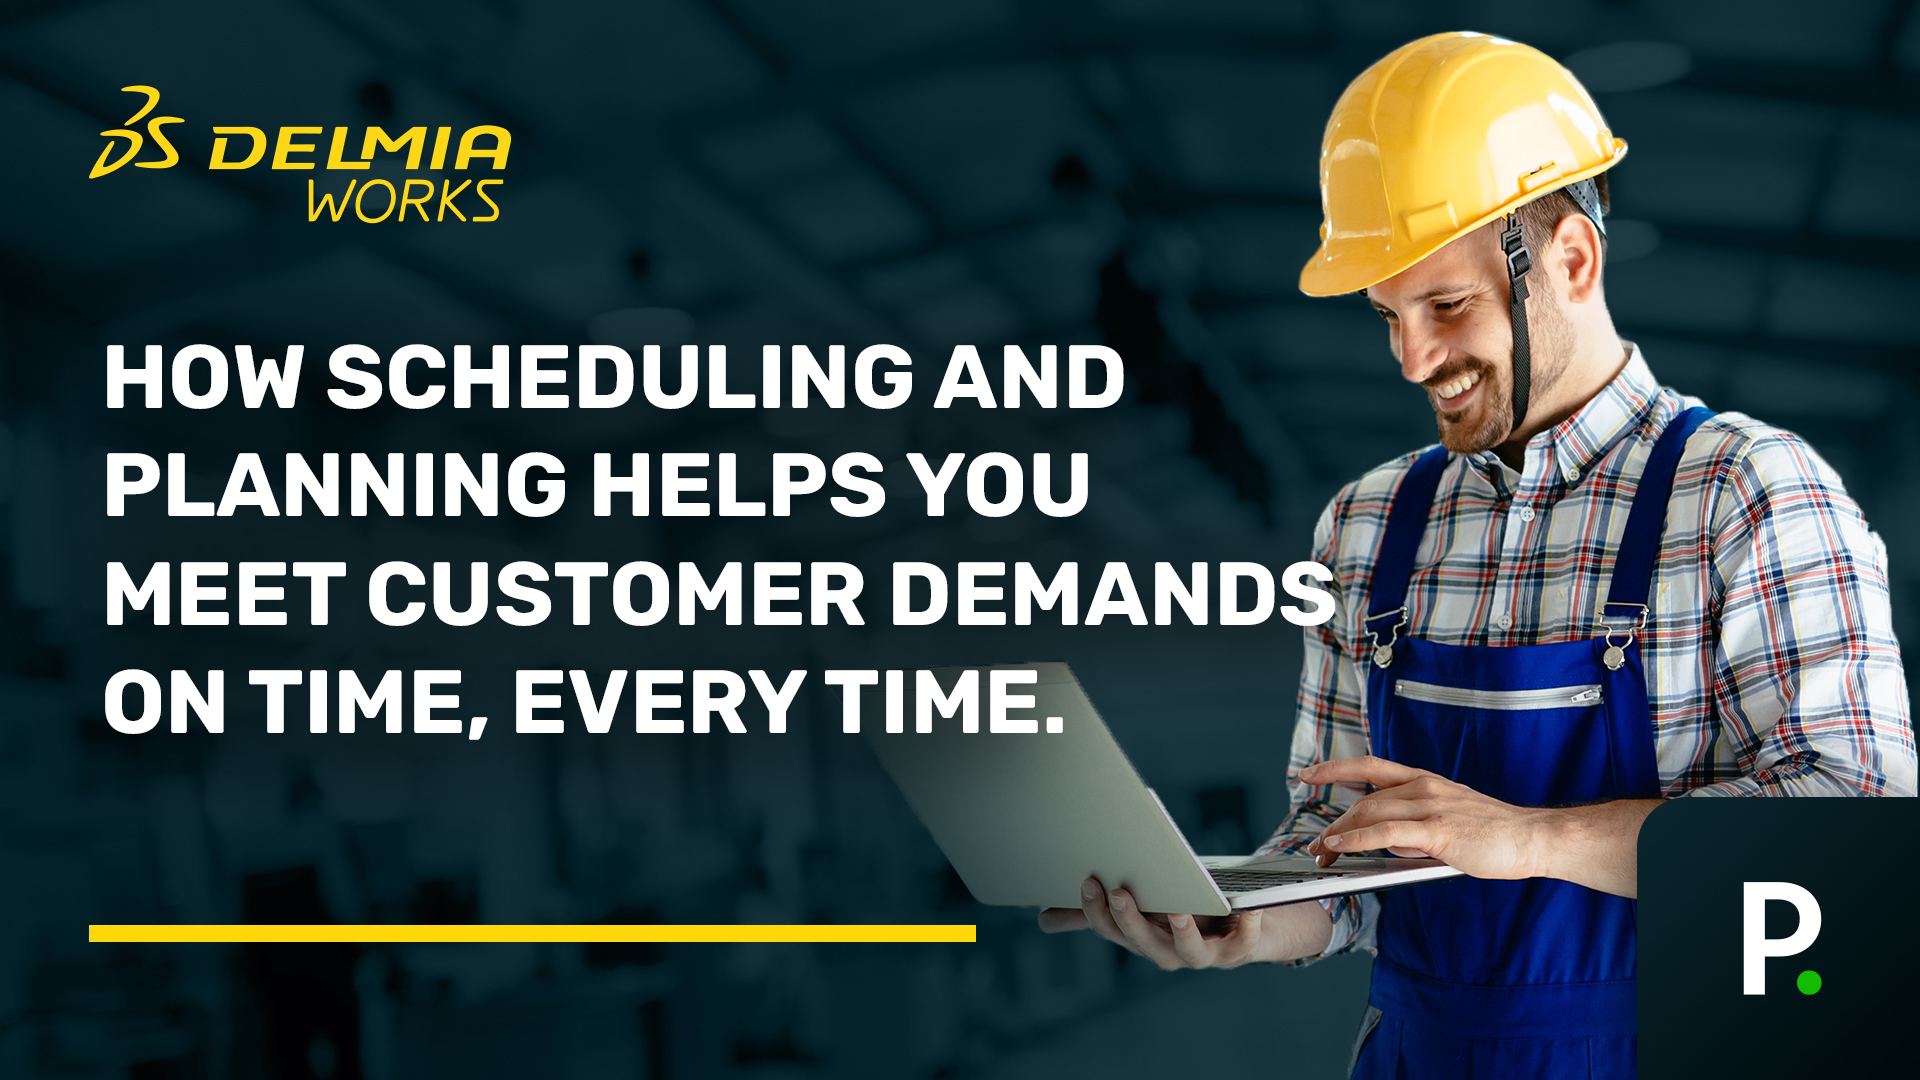 How DELMIAWorks’ production scheduling & planning helps you meet customer demands on time, every time